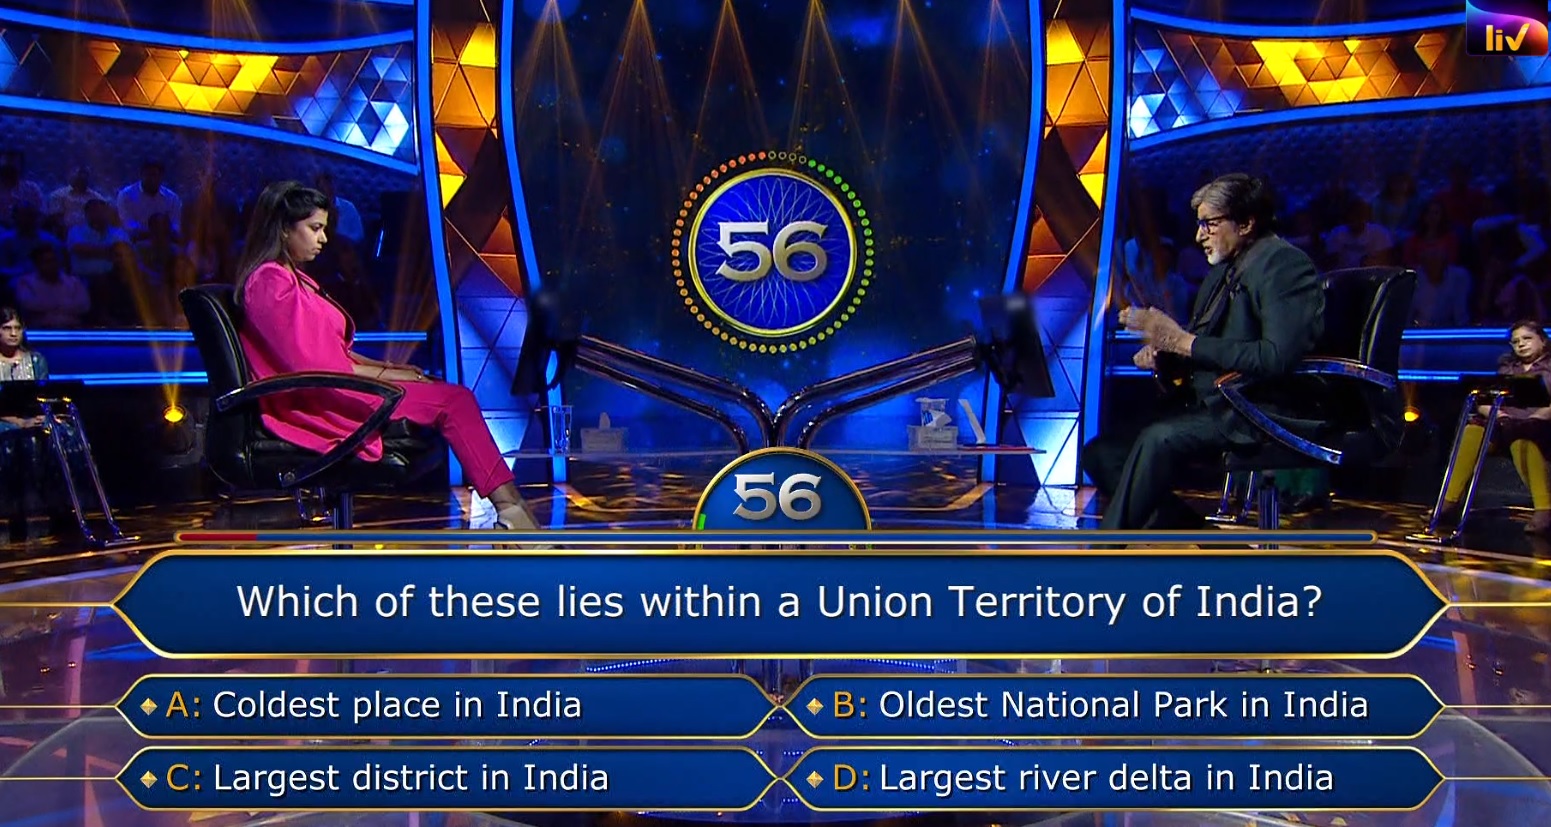 Ques : Which of these lies within a Union Territory of India?